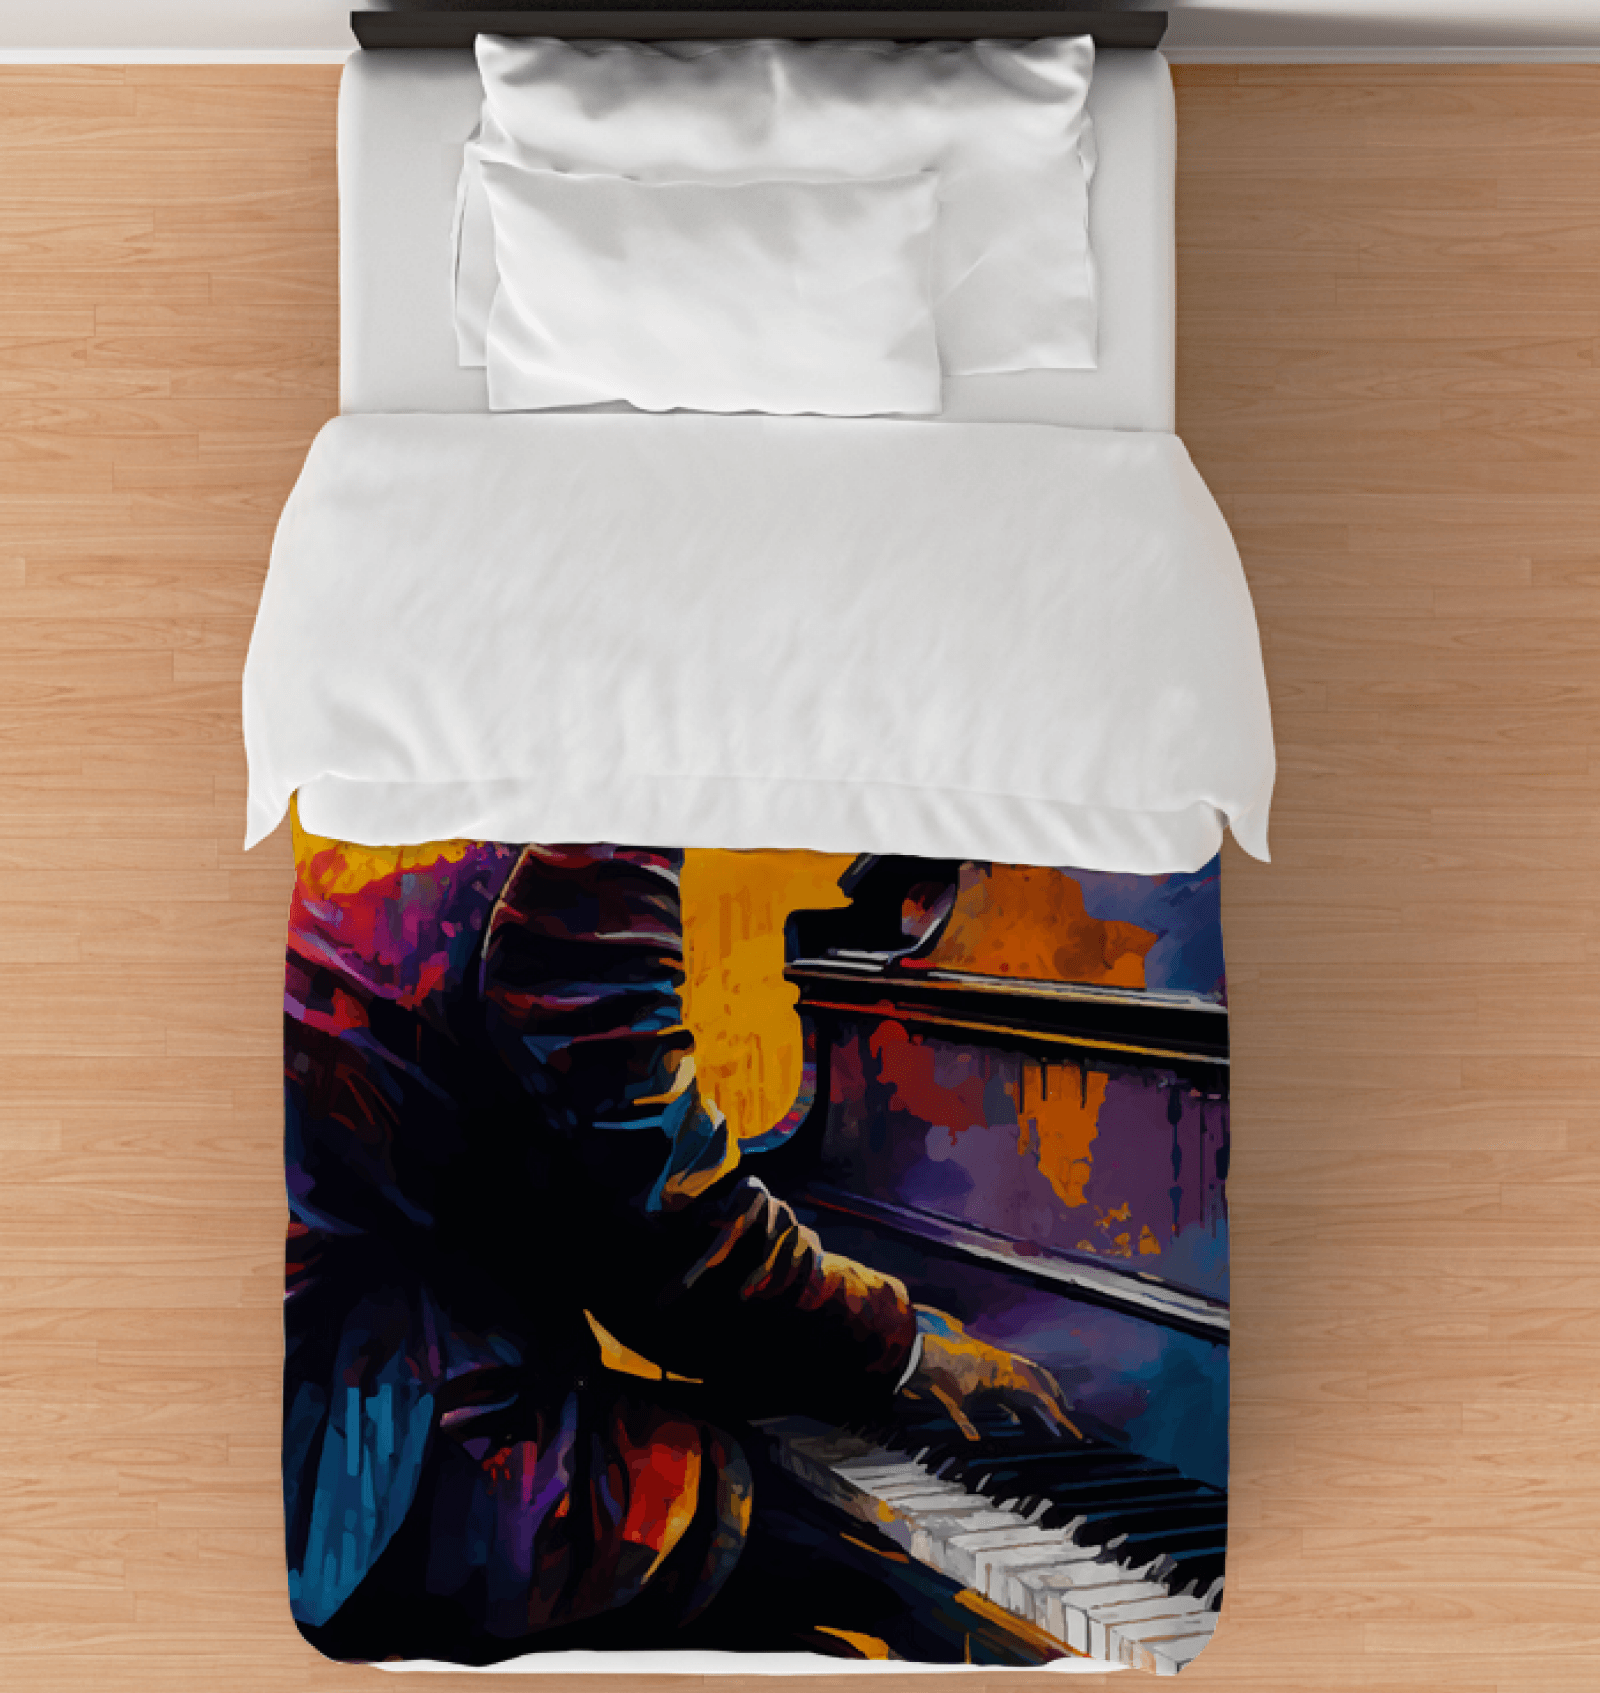 Noodling On The Keyboard Duvet Cover - Beyond T-shirts